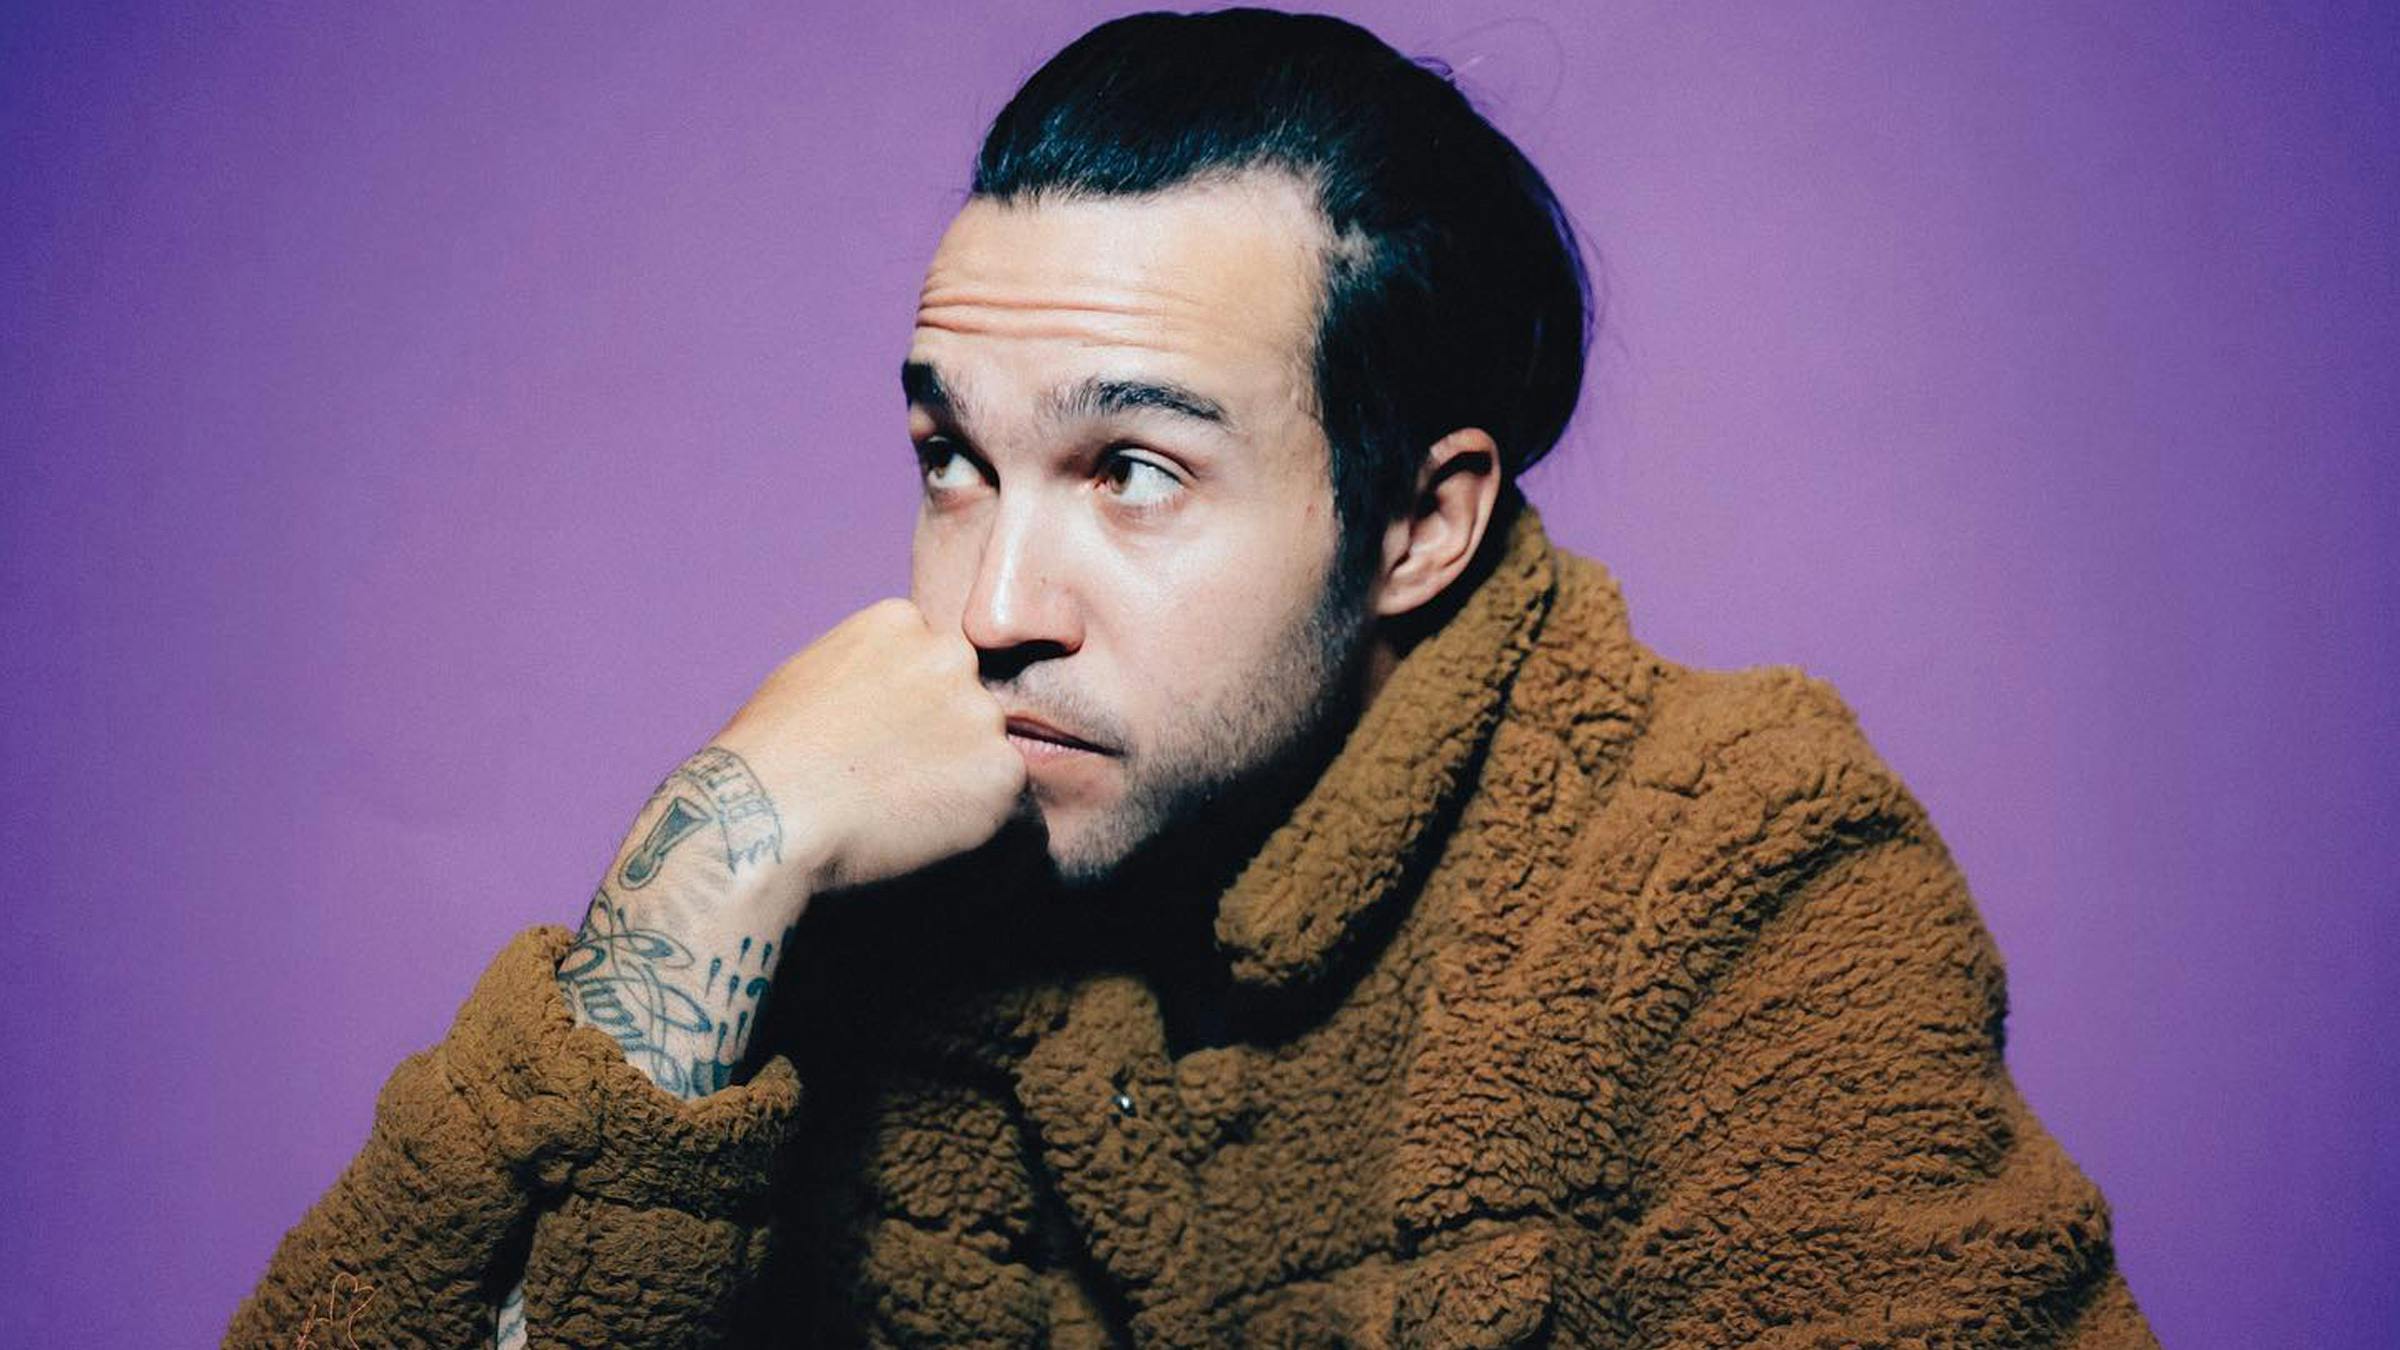 20 things you probably didn’t know about Fall Out Boy’s Pete Wentz